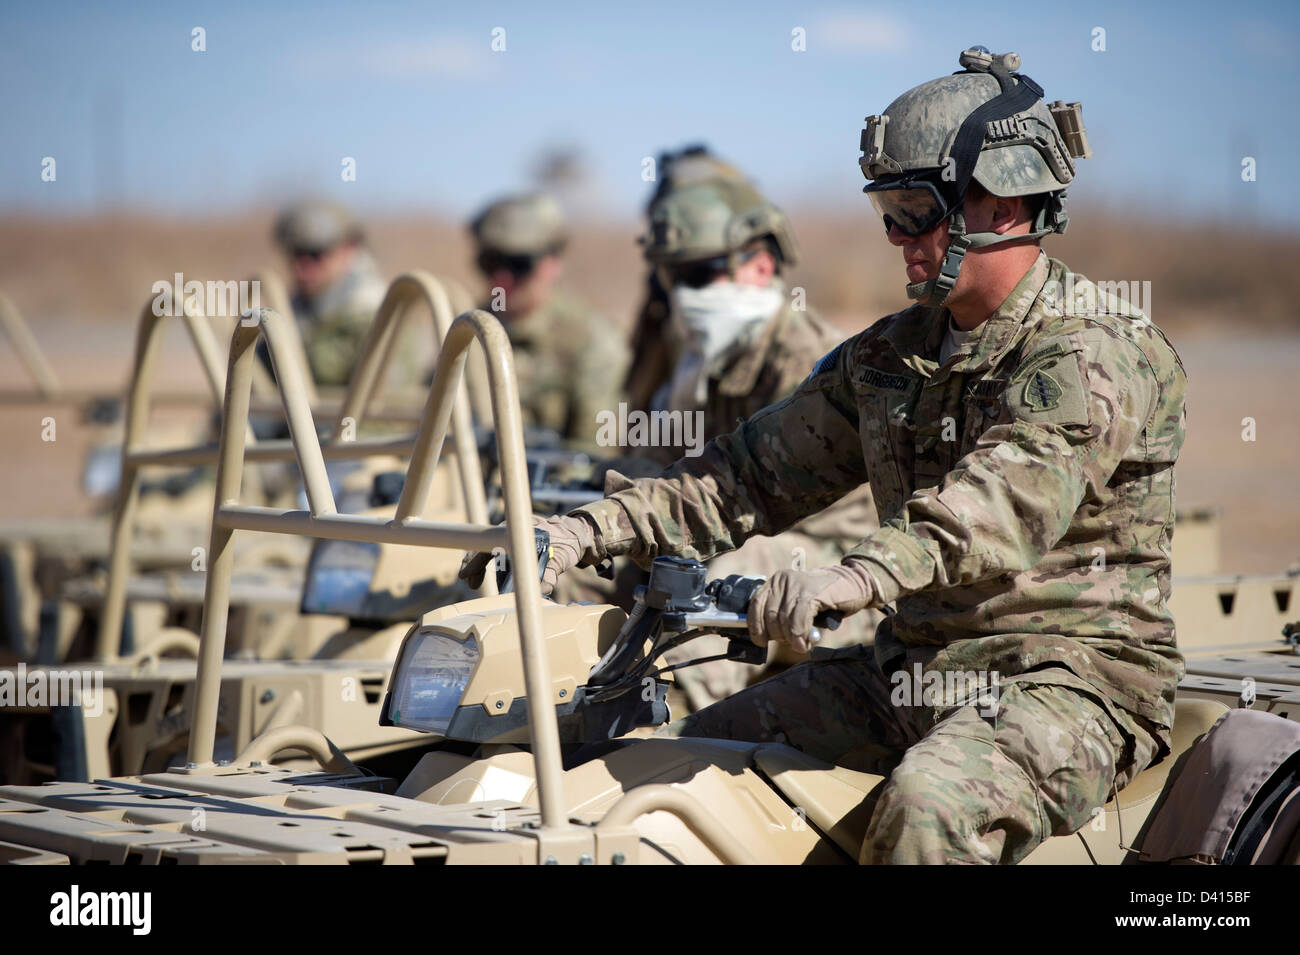 US Green Beret Special Forces soldiers perform off-road maneuvers with  light tactical all terrain vehicles February 11, 2013 at Fort Bliss,  Texas,. Green Berets trained with LTATVs to gain familiarization with the